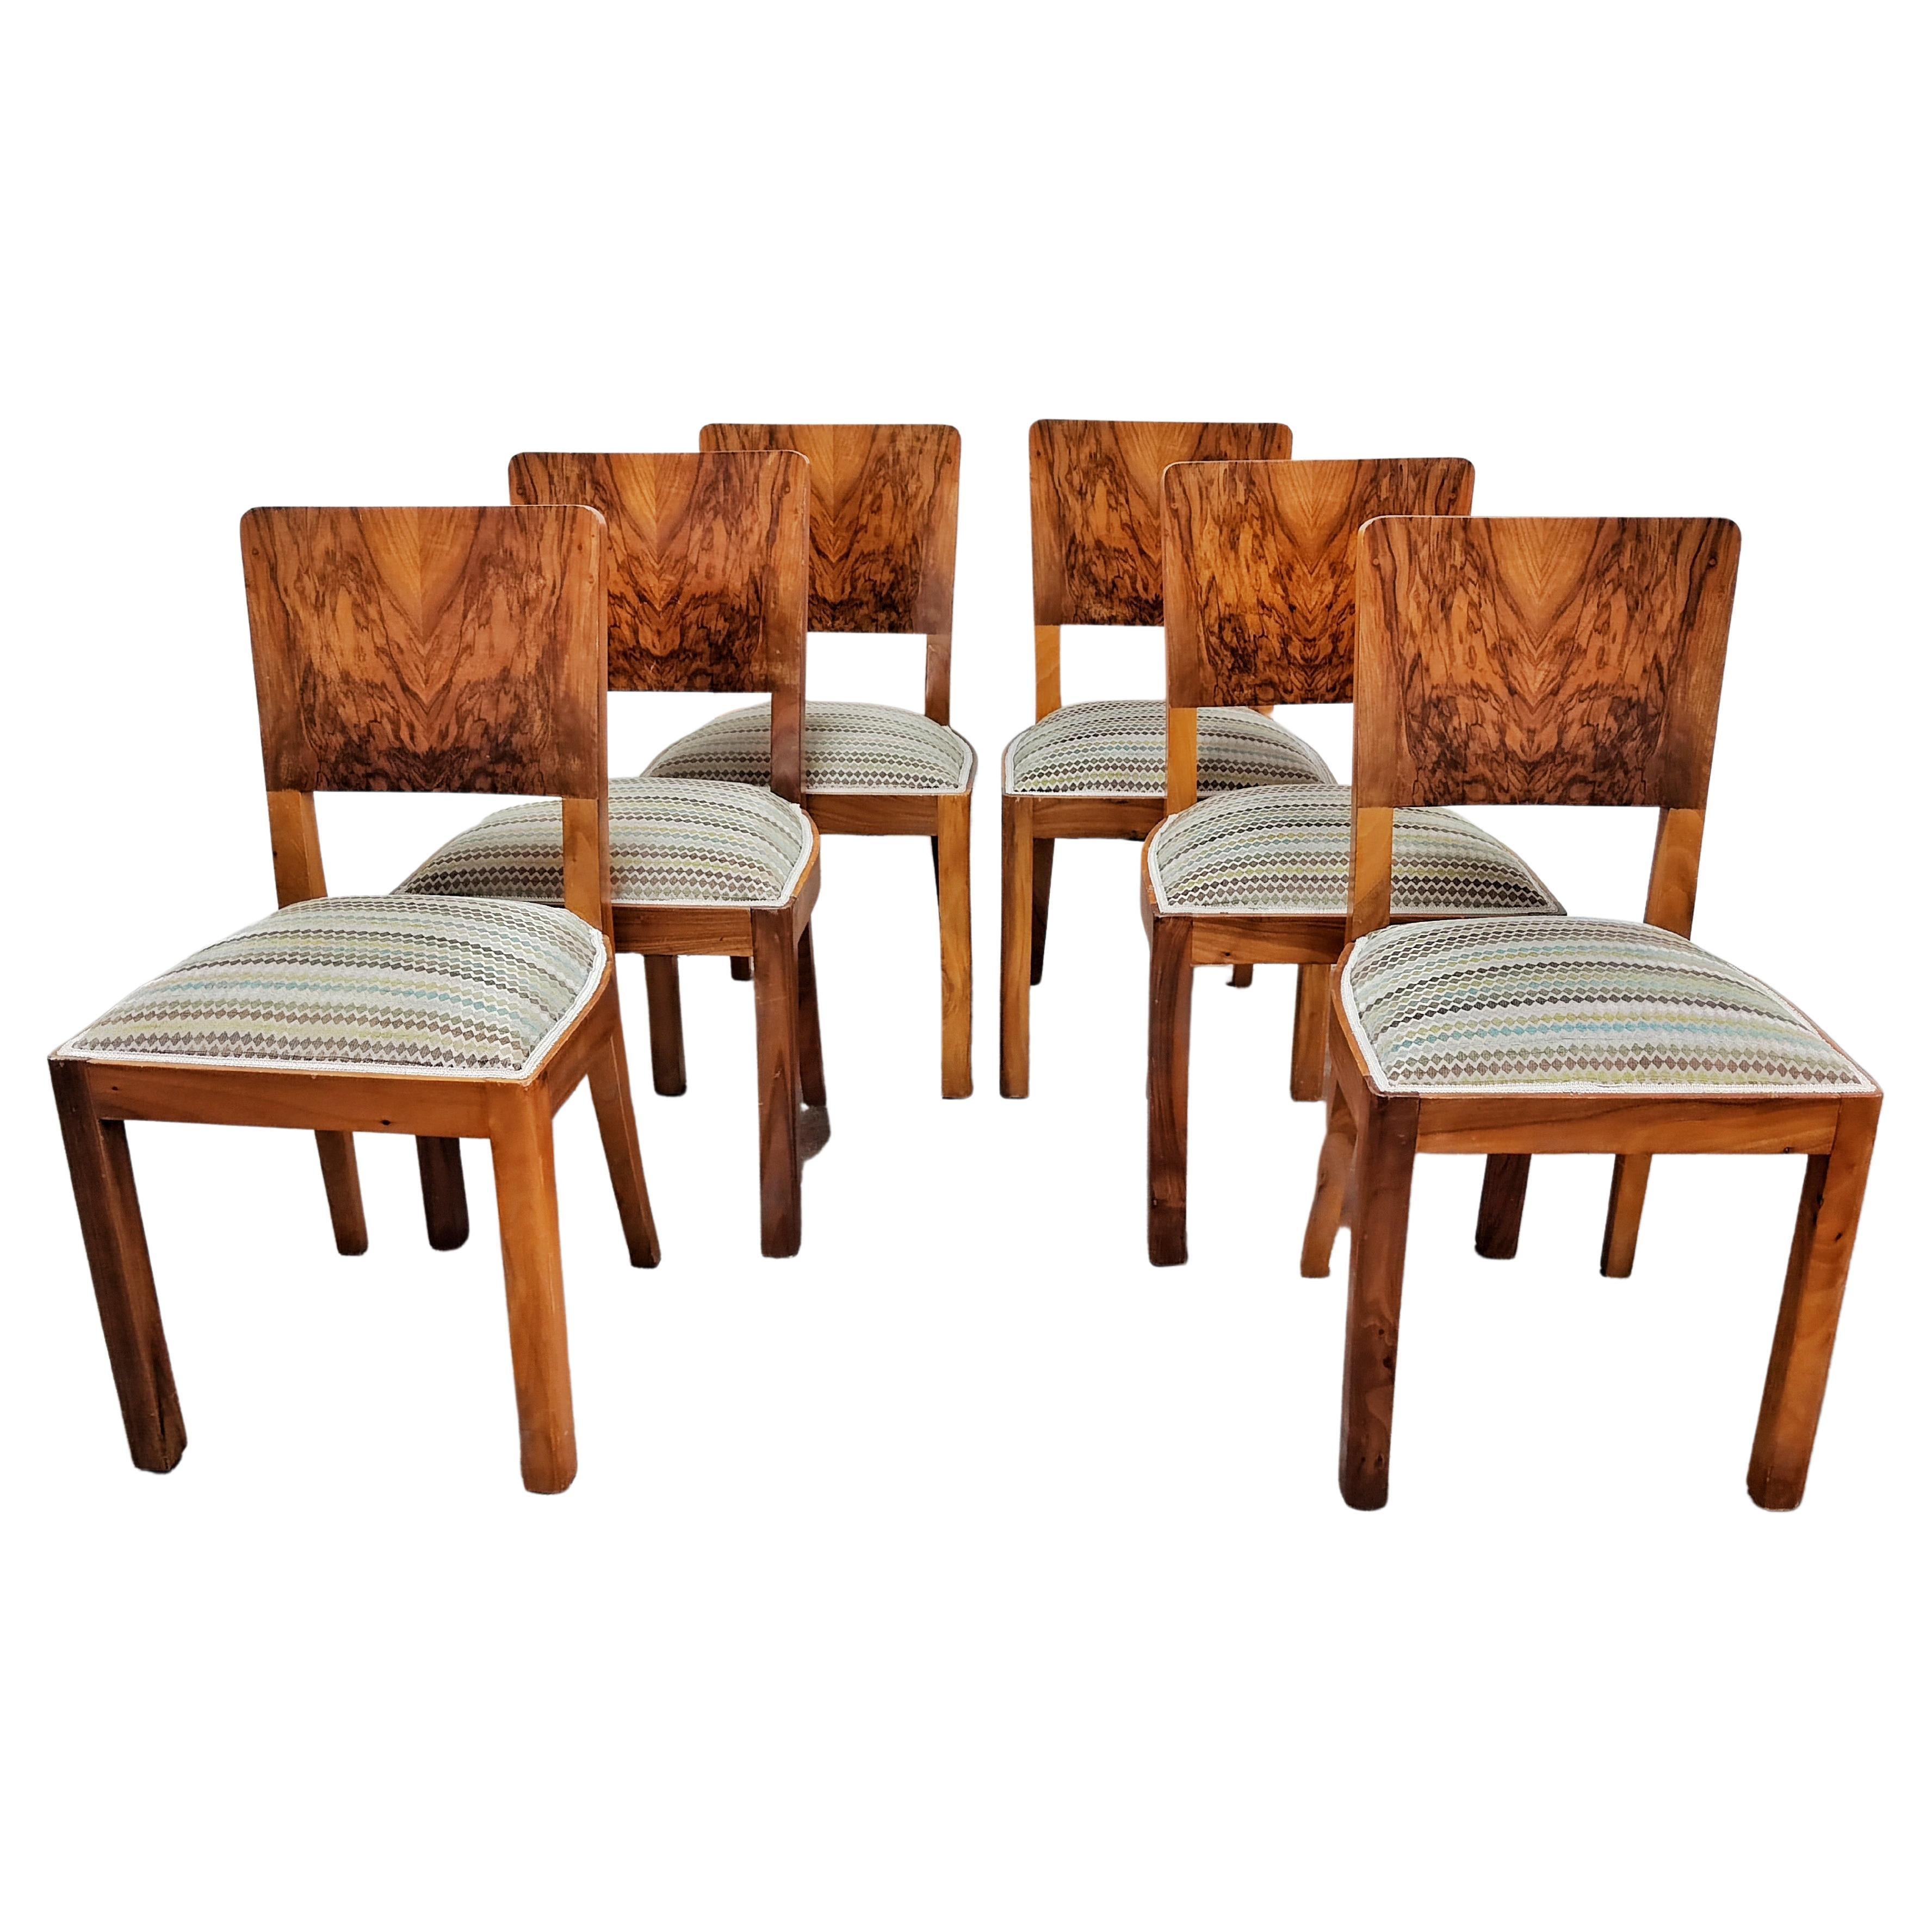 Set of Six Art Deco Dining Chairs in Walnut Roots Veneer, Austria 1940s For Sale